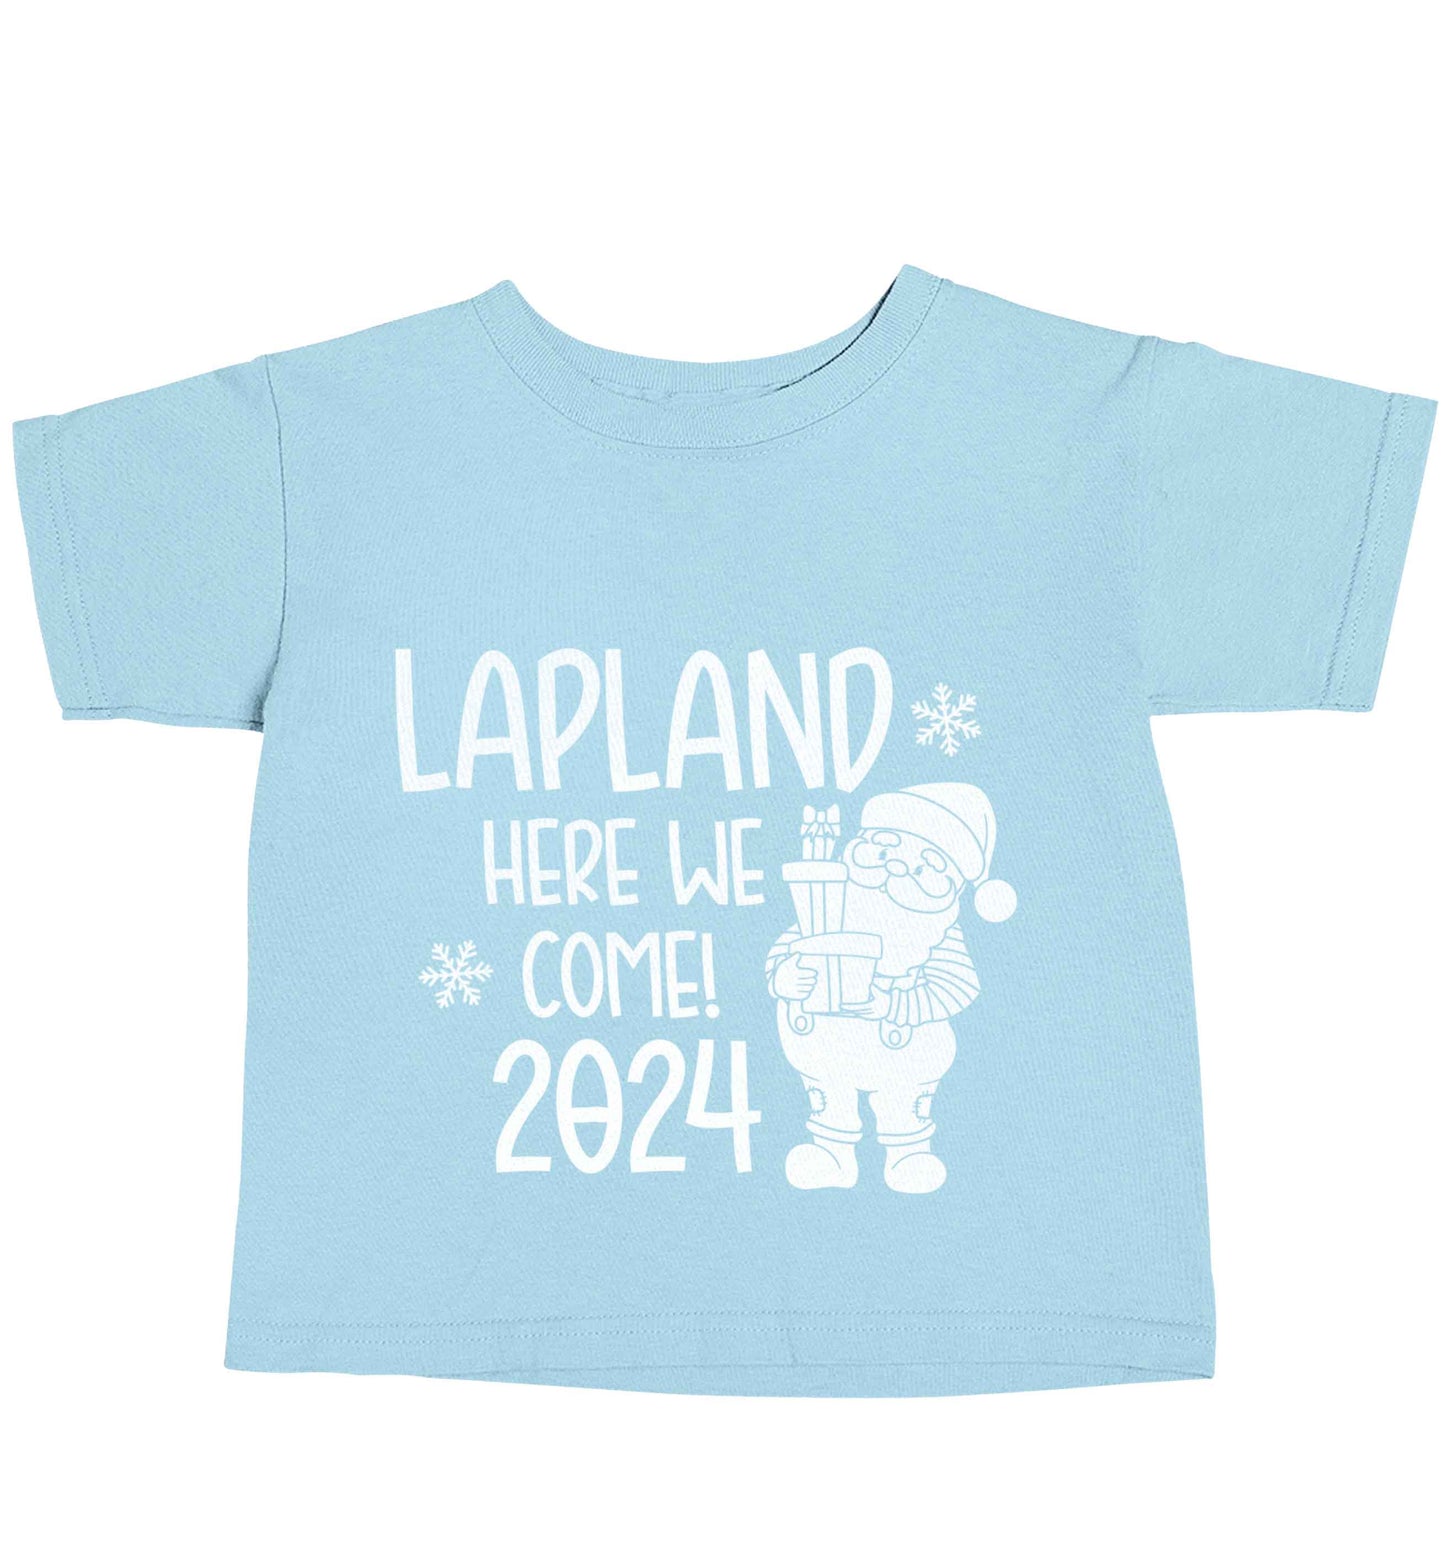 Lapland here we come light blue baby toddler Tshirt 2 Years